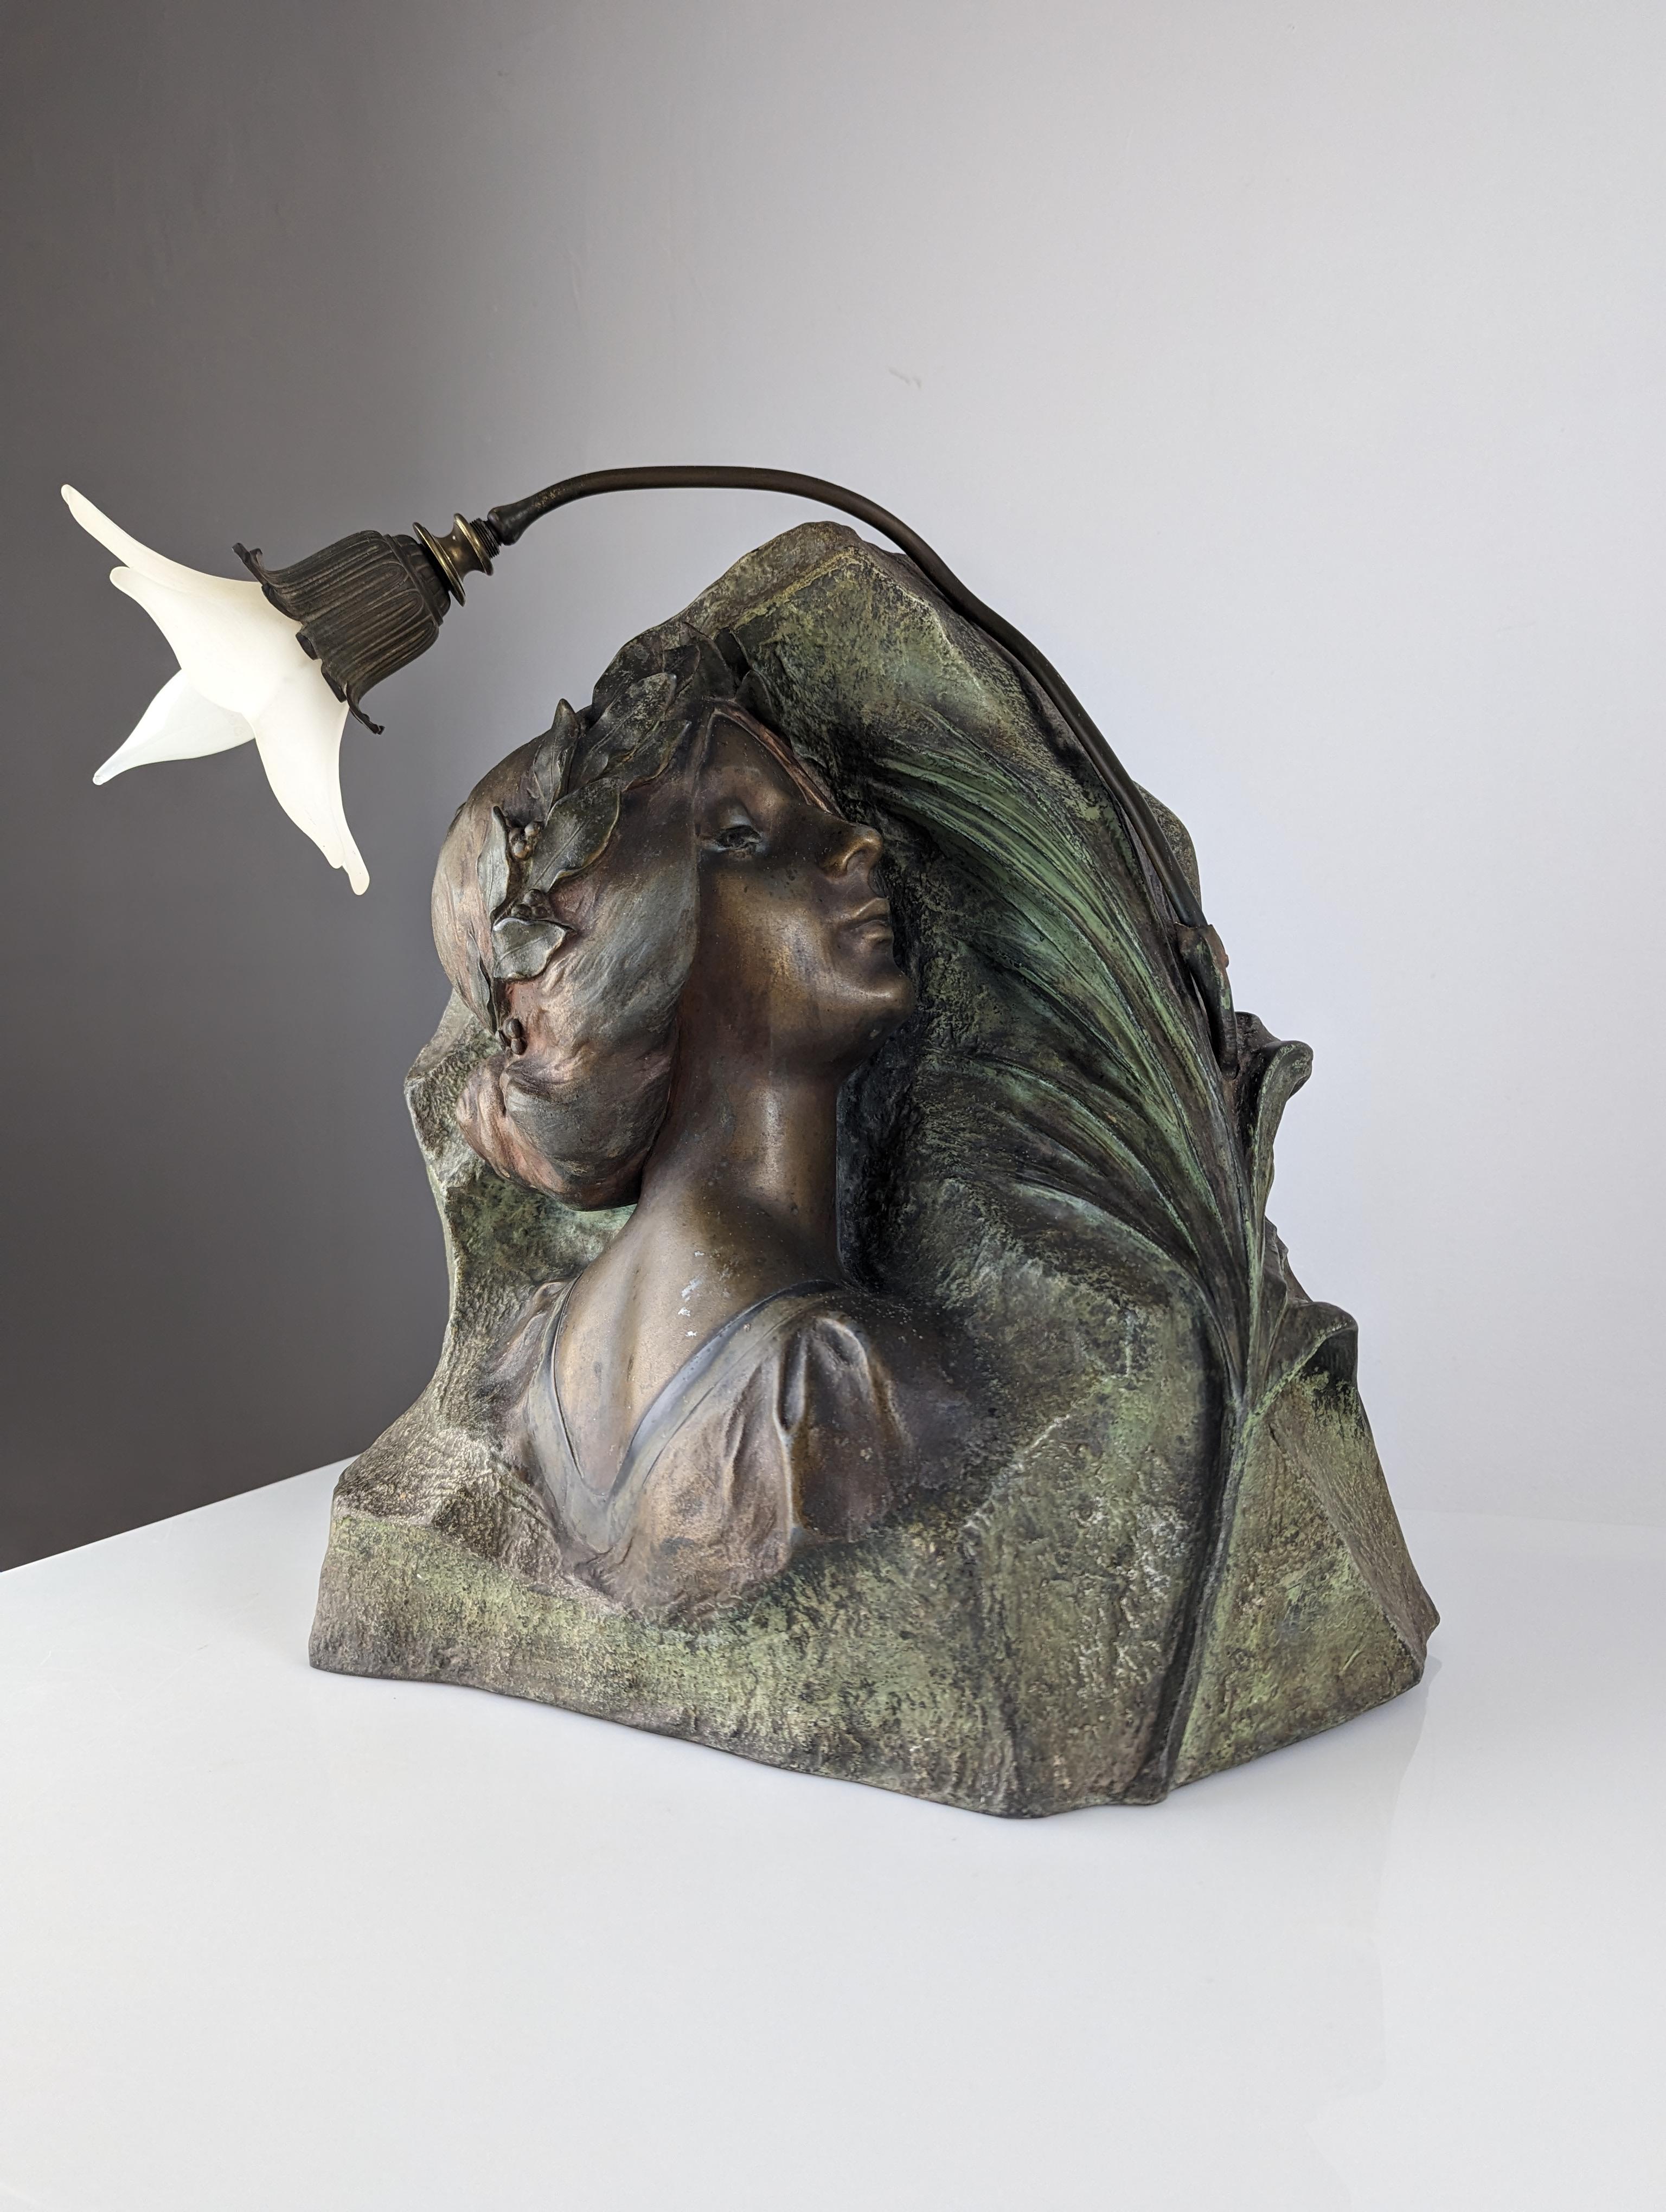 This exquisite bronze sculpture lamp, designed by French sculptor Julien Causse (1869 - 1914), is a wonderful decorative piece that captures the elegance and beauty of a lady carved from stone. Carved in meticulous detail, the female figure radiates